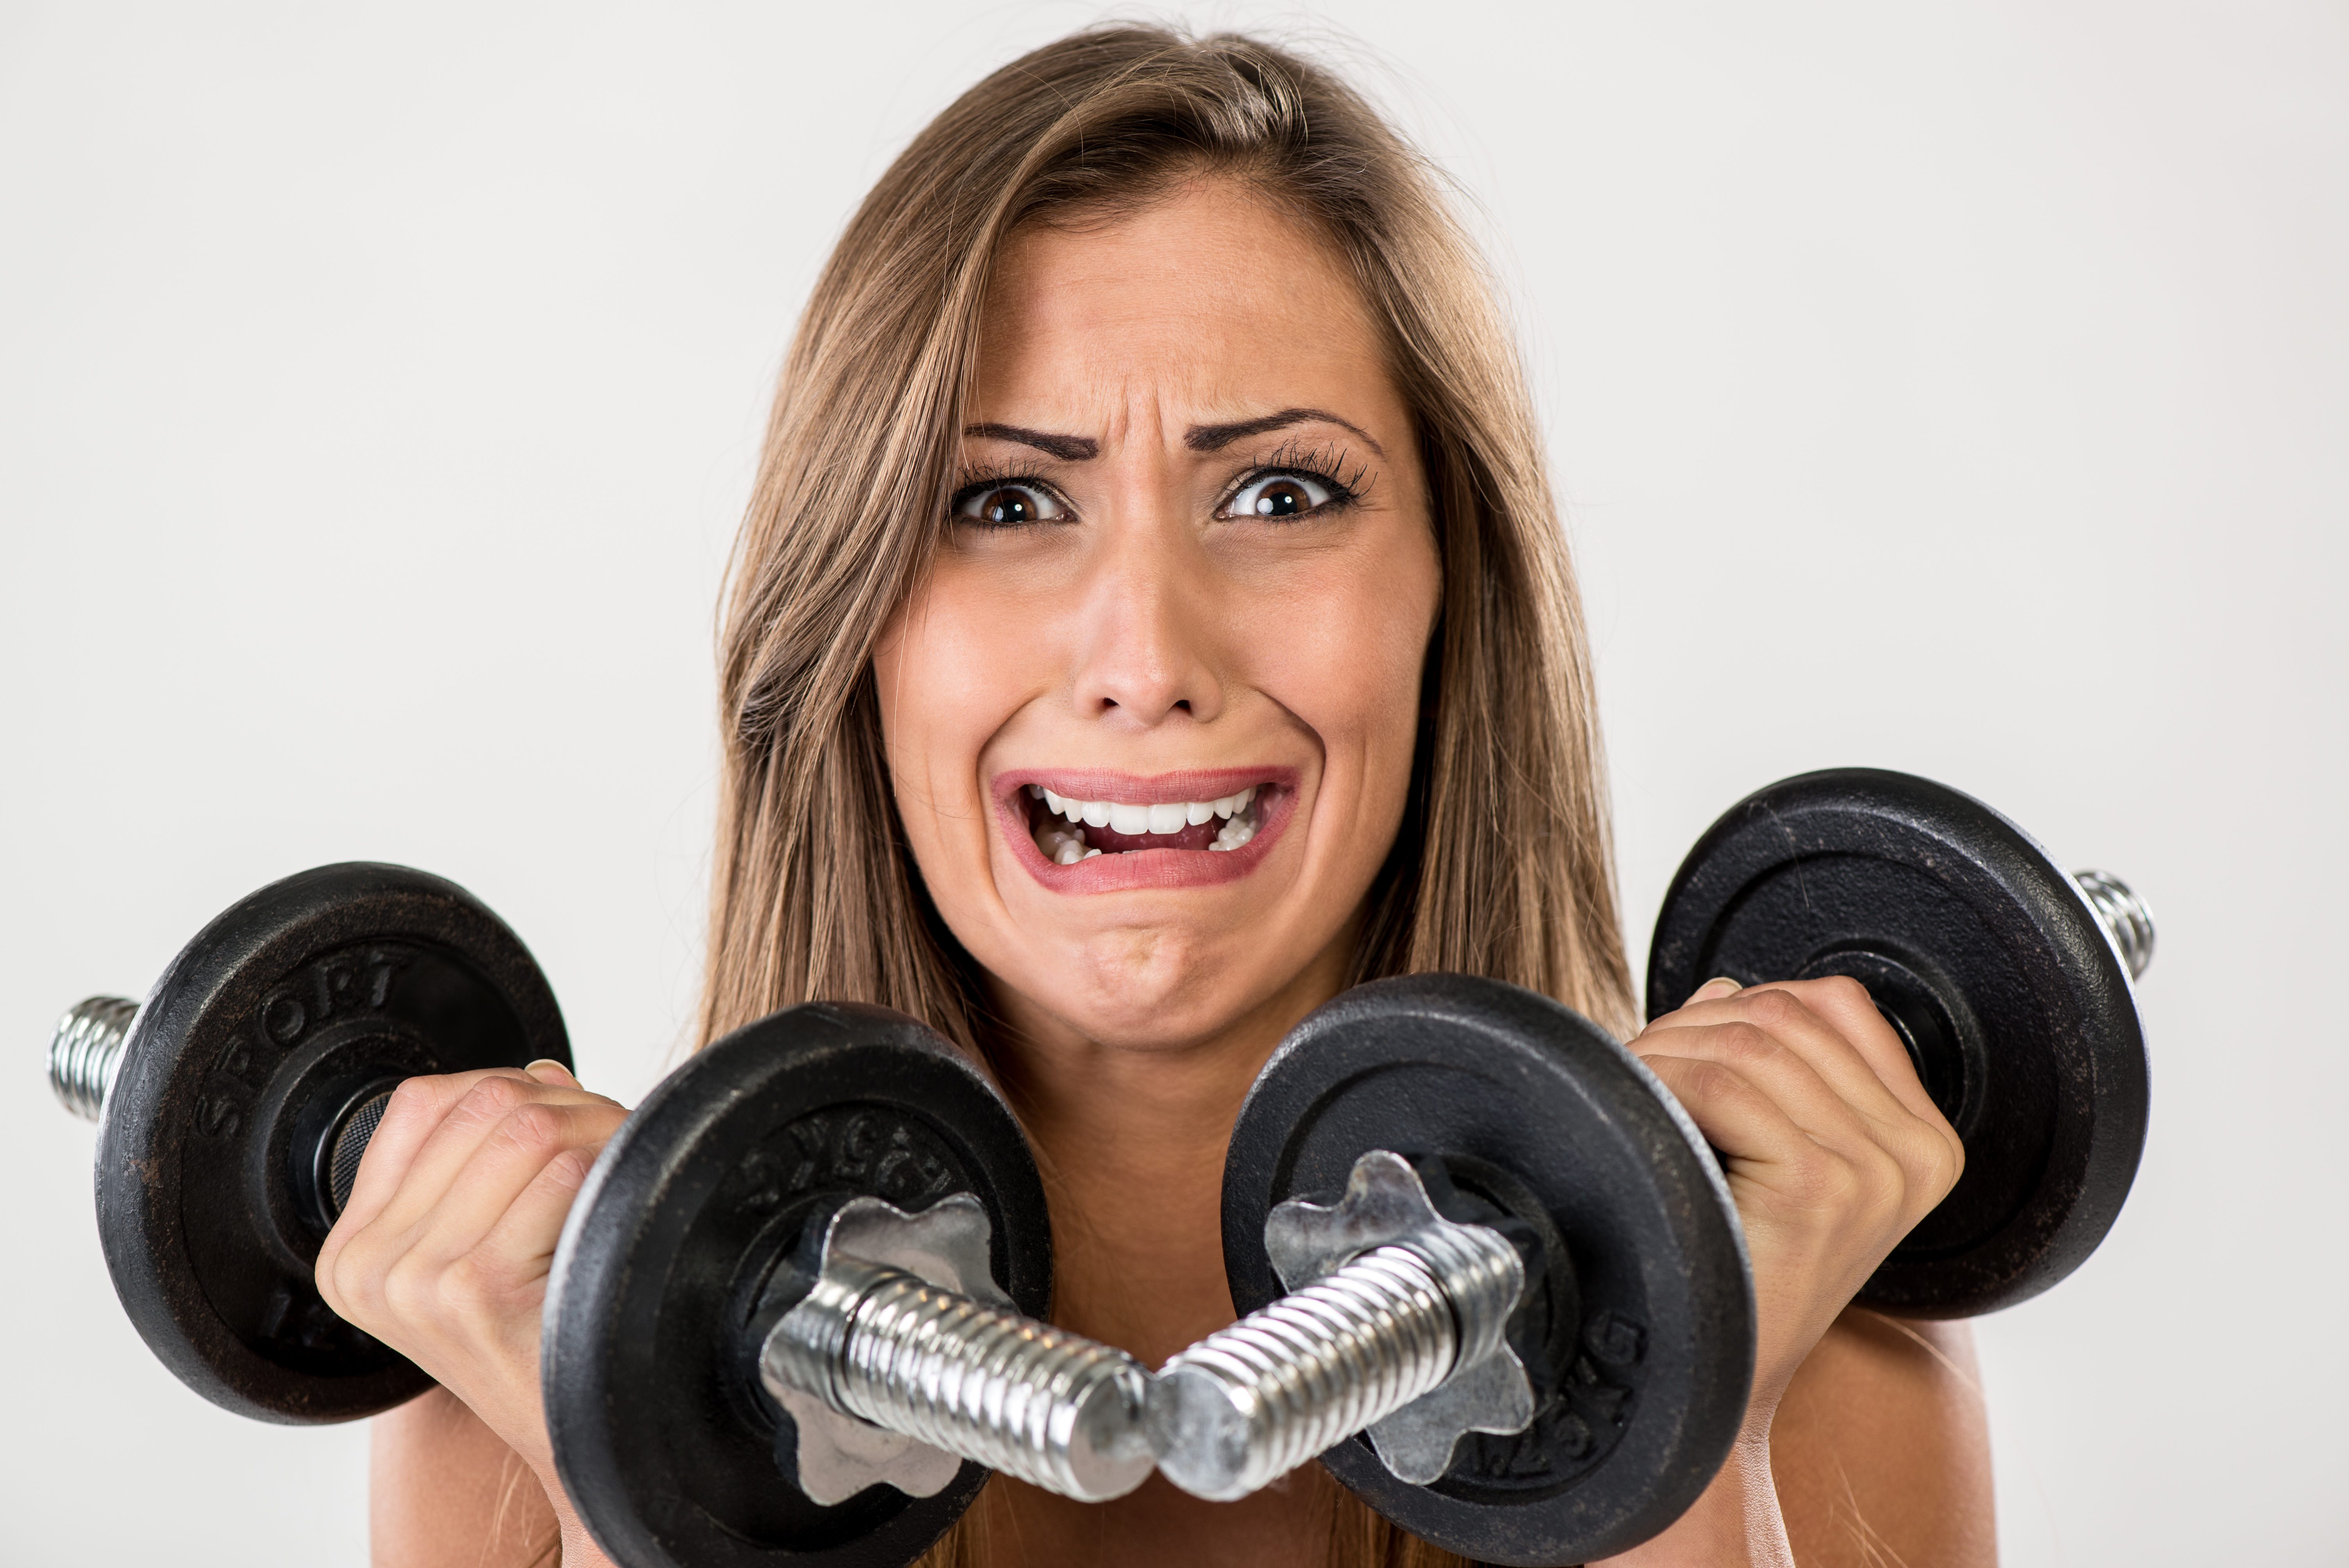 THE BIGGEST PROBLEM FOR PERSONAL TRAINERS